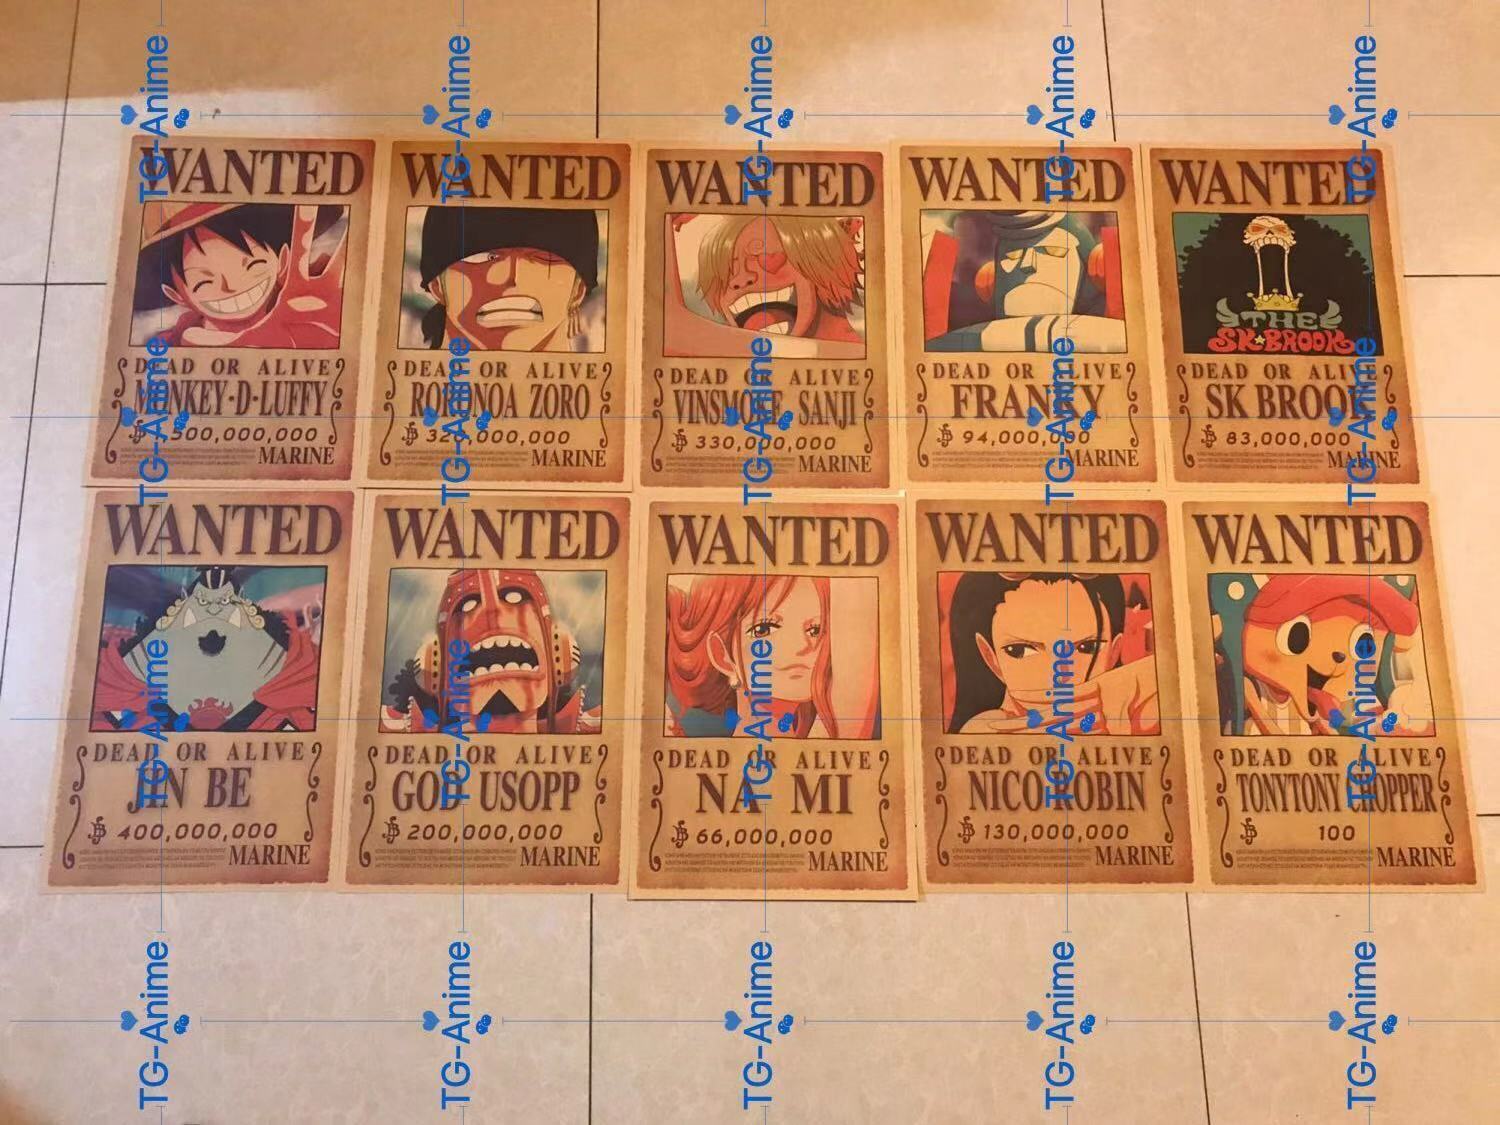 Anime One Piece Straw Hat Pirates Crew Wanted Posters 10 pcs/set HIGH QUALITY